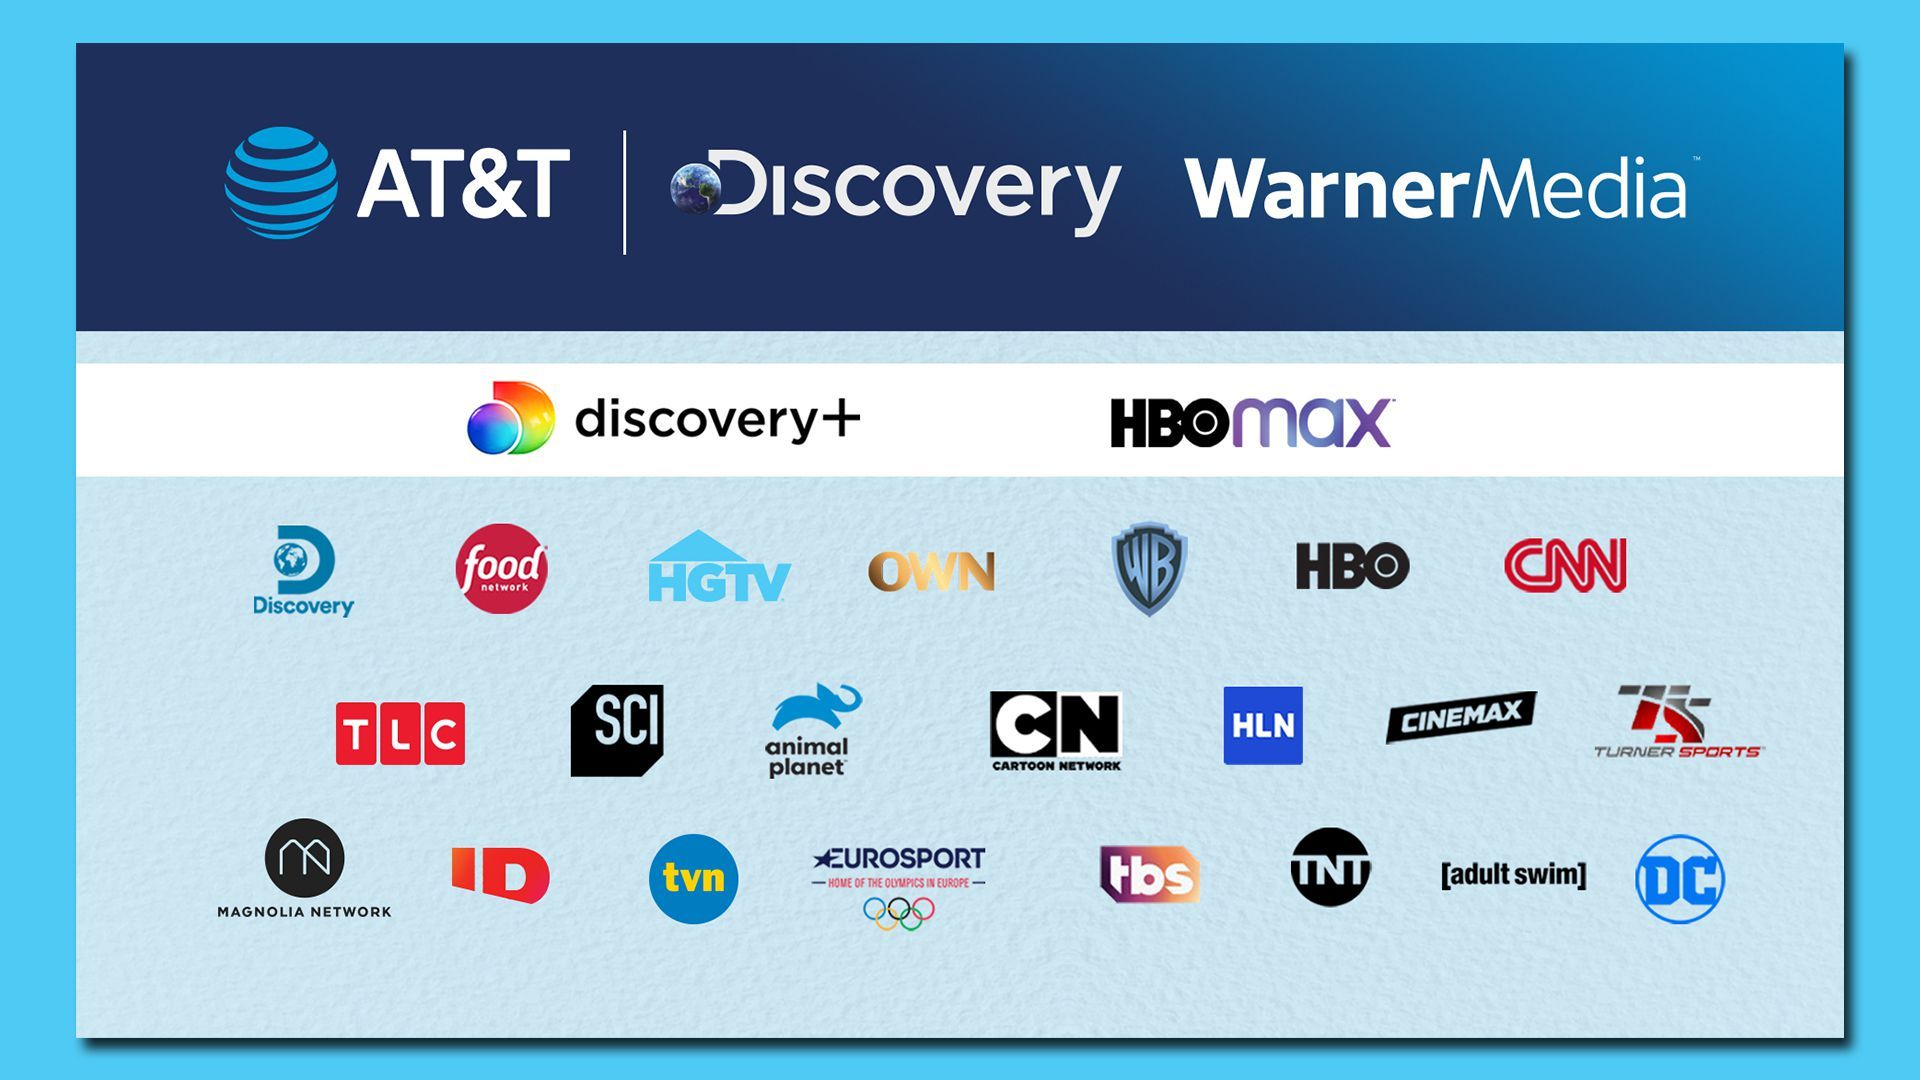 Picture of the merger between AT&T and Discovery